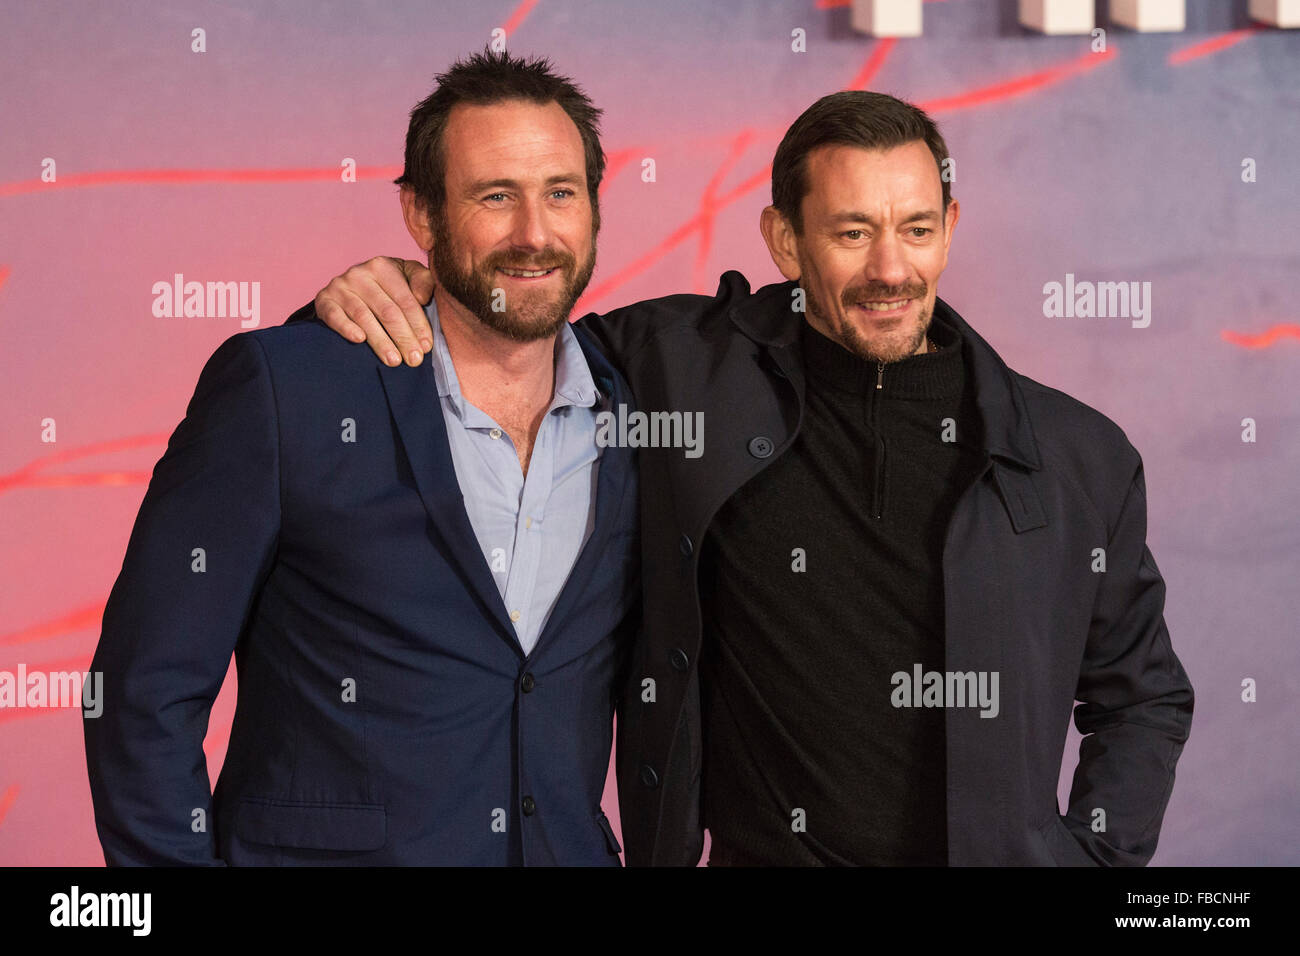 London, UK. 14 January 2016. Actors Jason Fox and Matthew Ollerton attend UK Premiere of 'The Revenant' at Empire Leicester Square on January 14, 2016 in London, England. Credit:  Vibrant Pictures/Alamy Live News Stock Photo